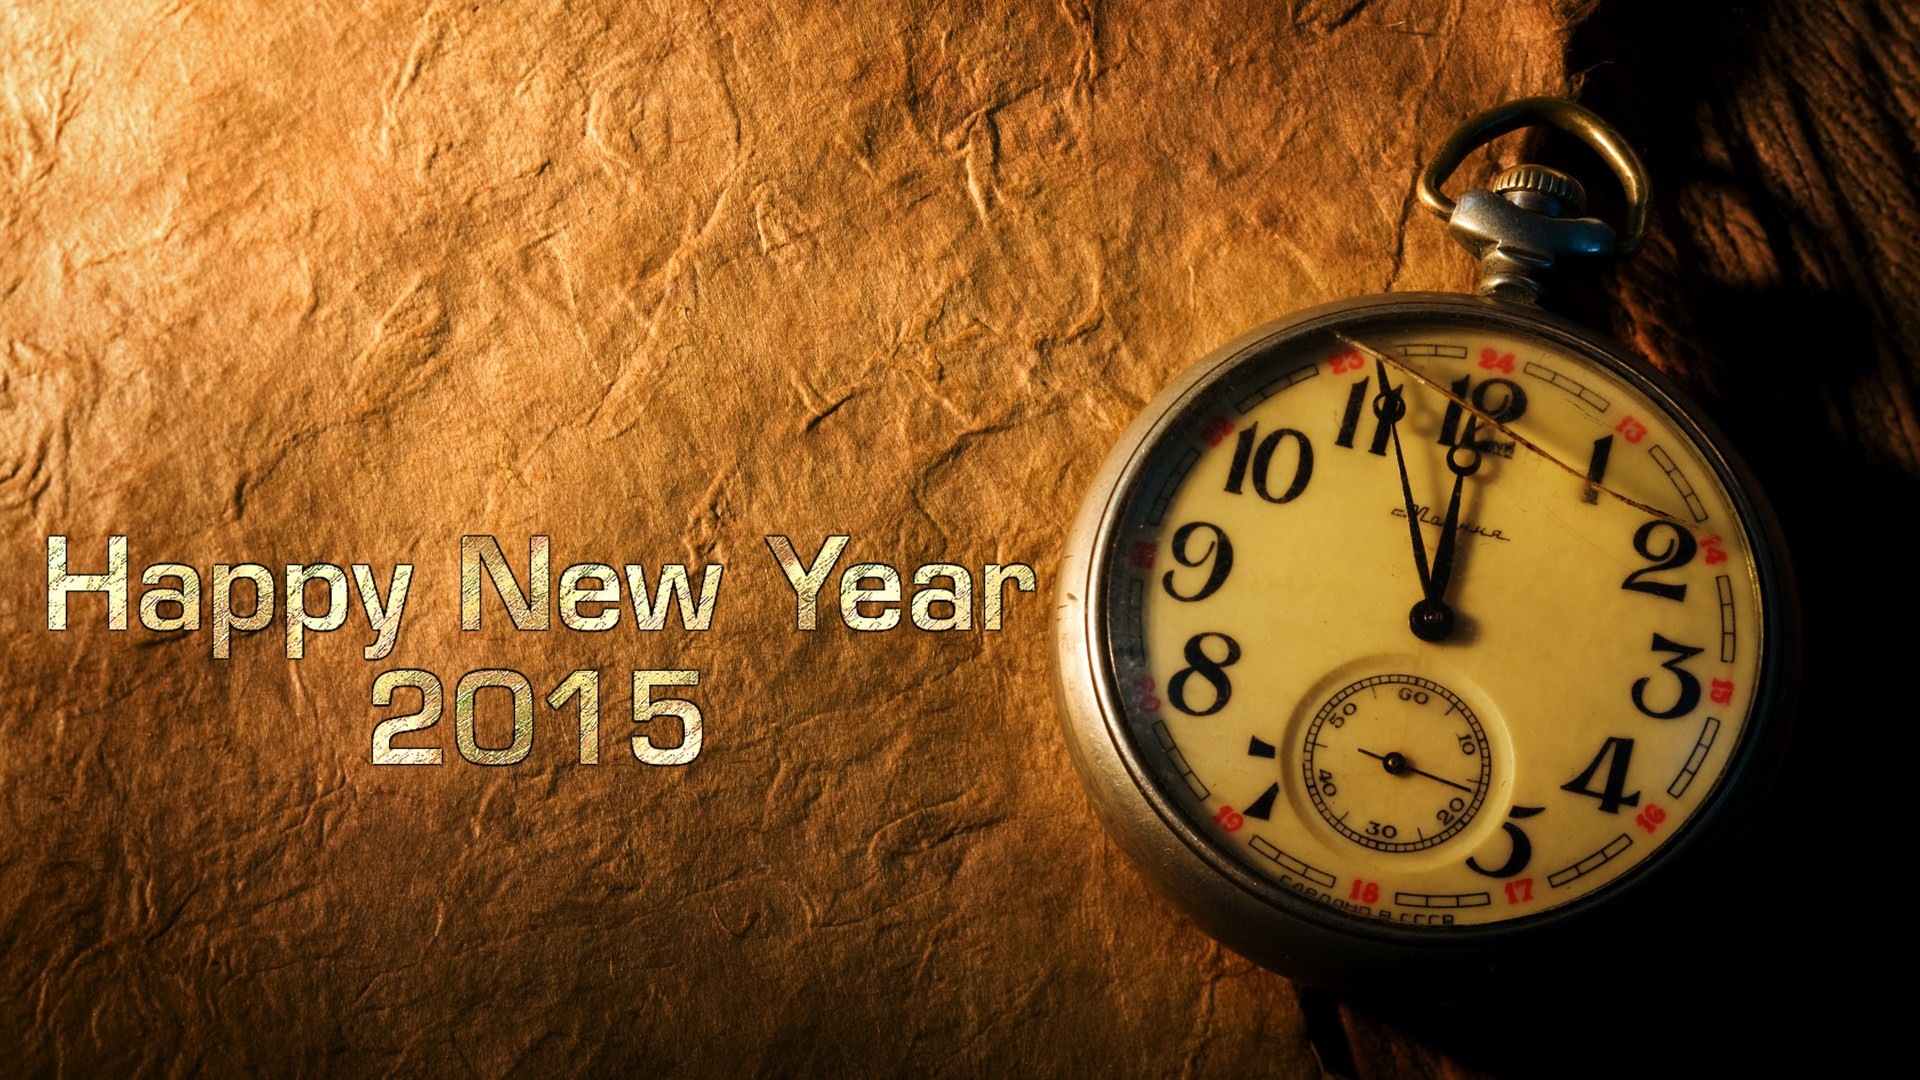 2015 New Year theme HD wallpapers (2) #8 - 1920x1080